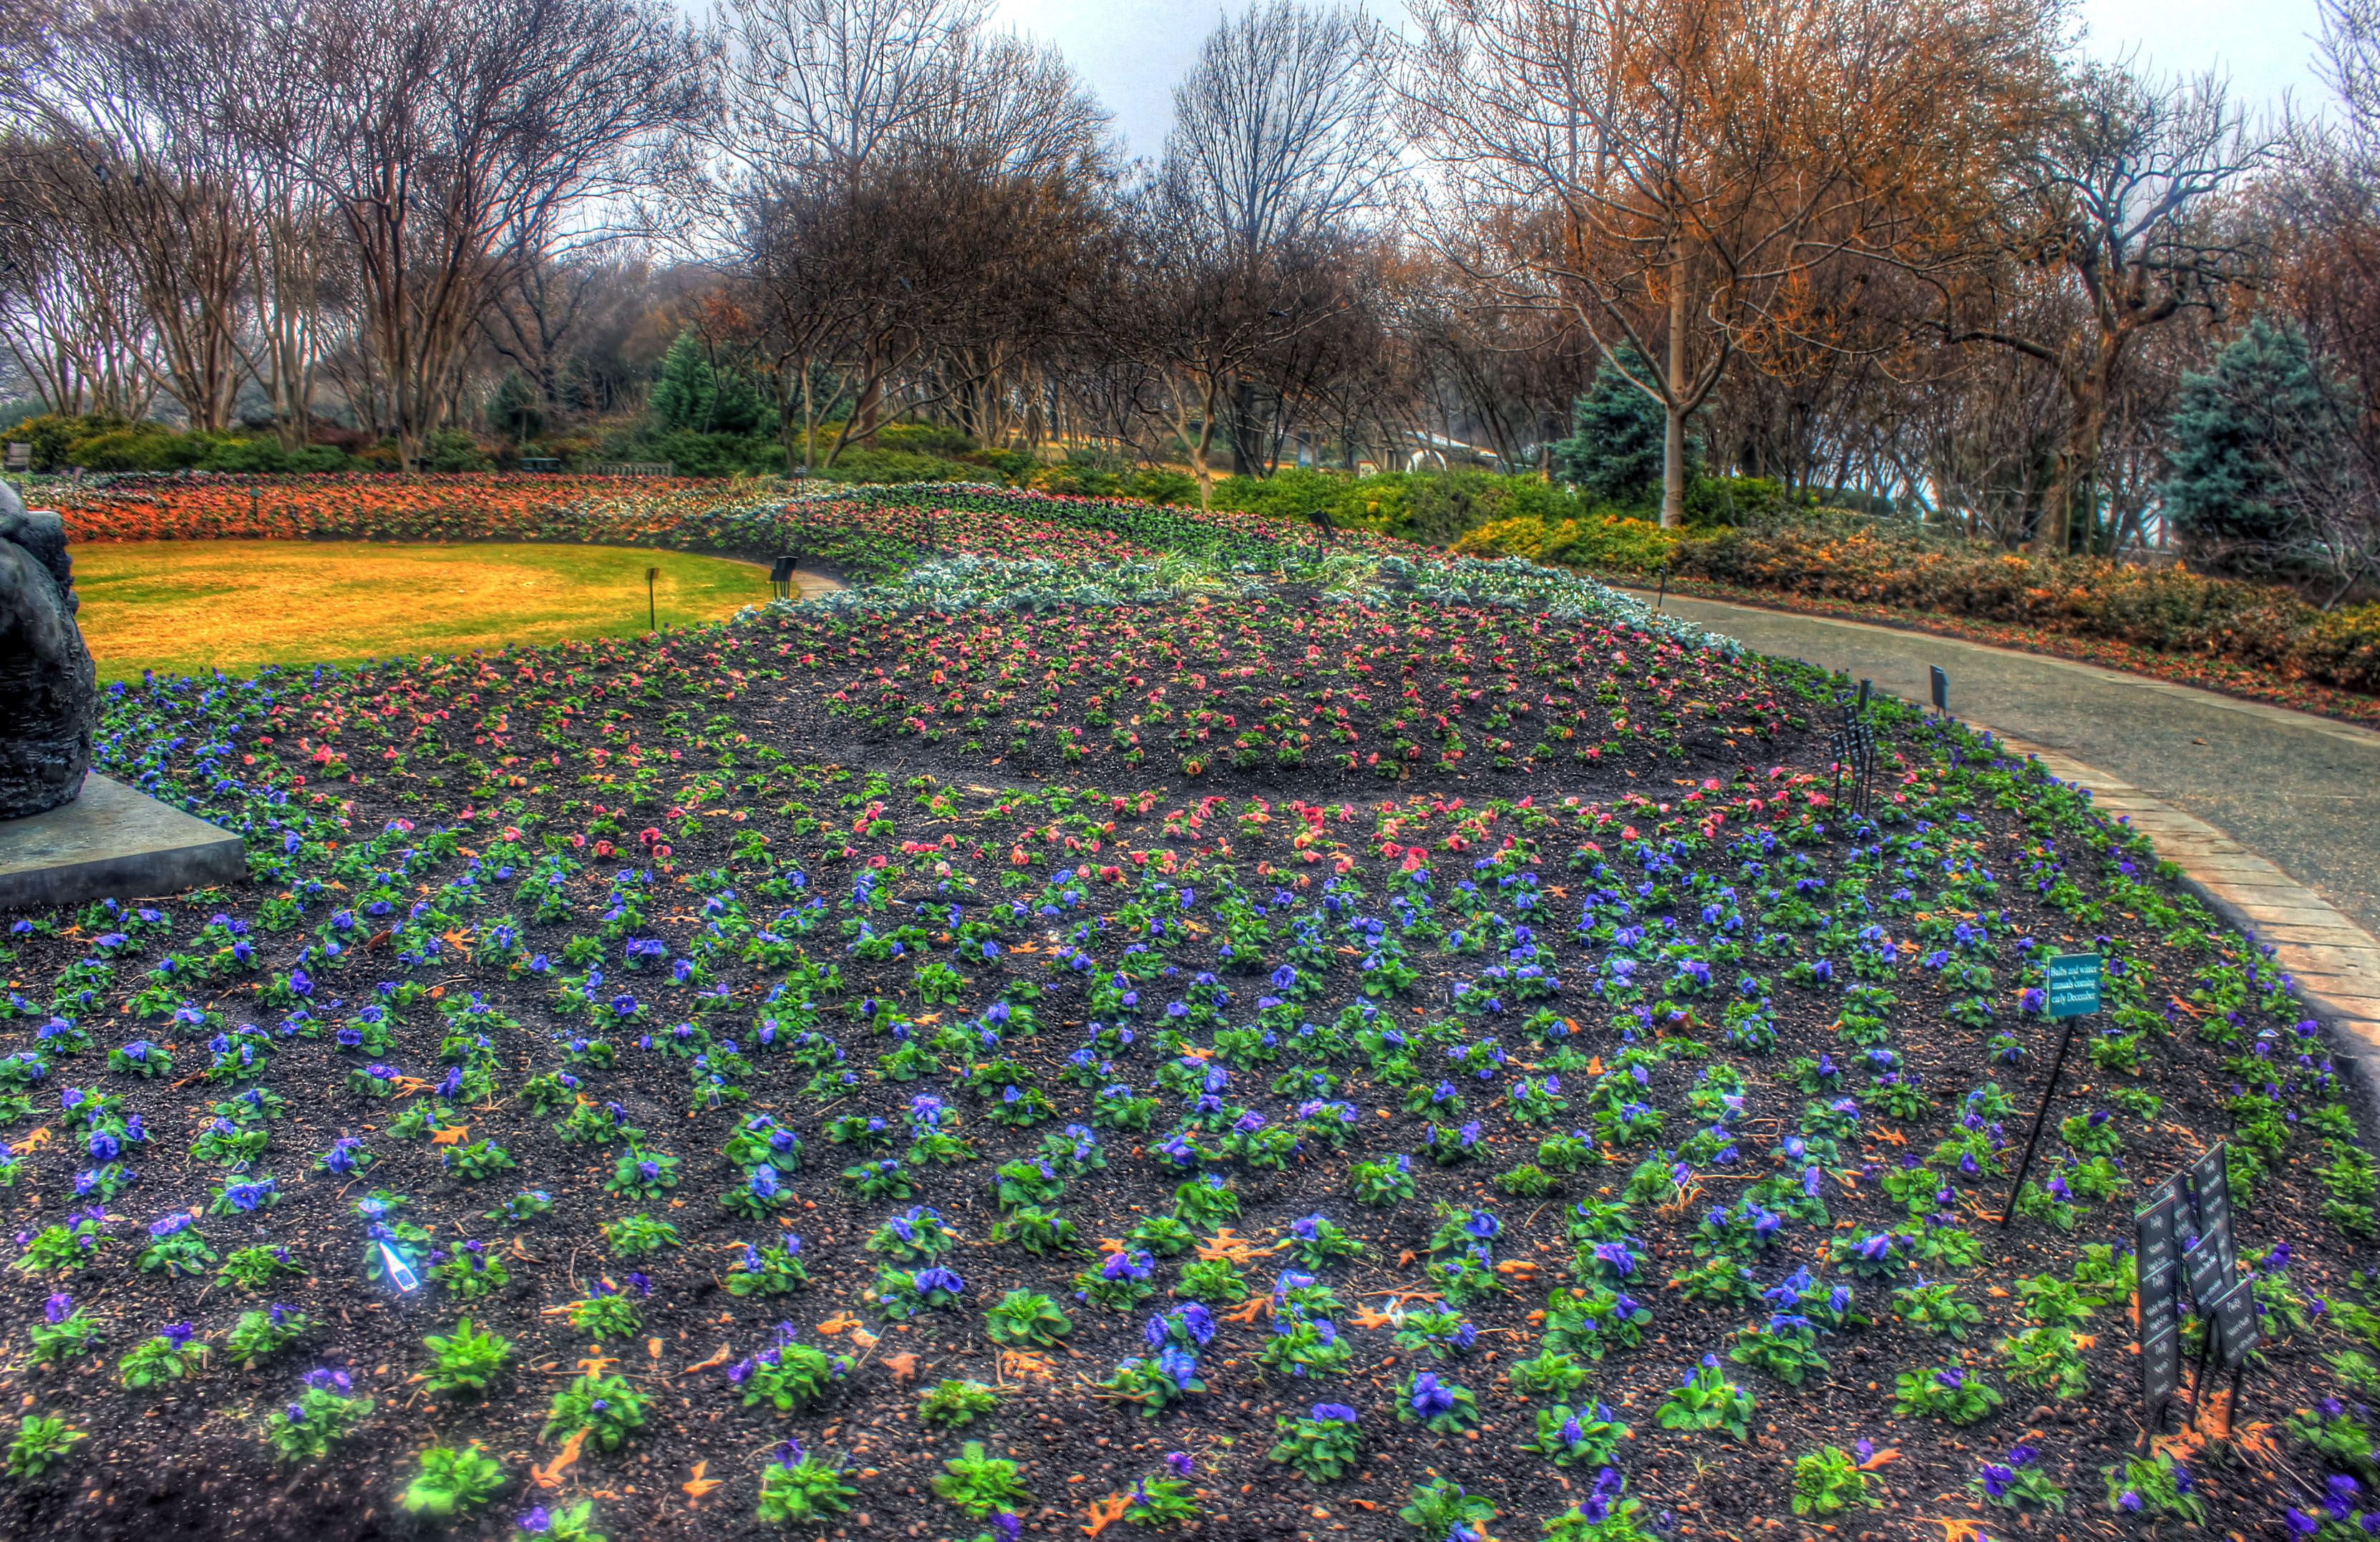 flower bed in dallas, texas image - free stock photo - public domain